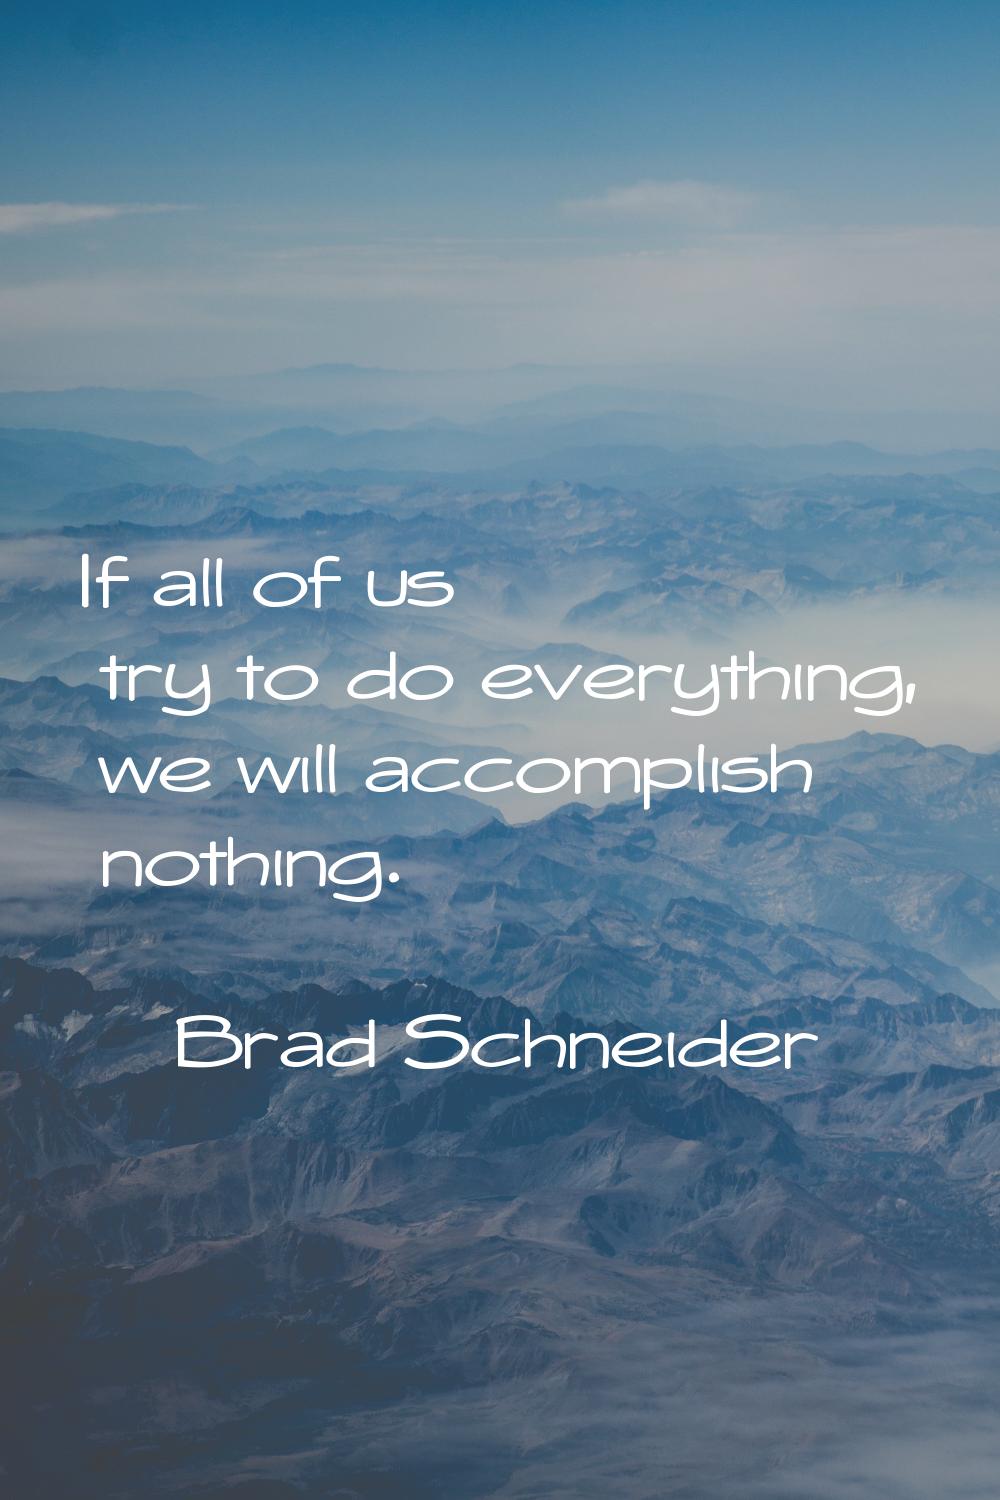 If all of us try to do everything, we will accomplish nothing.